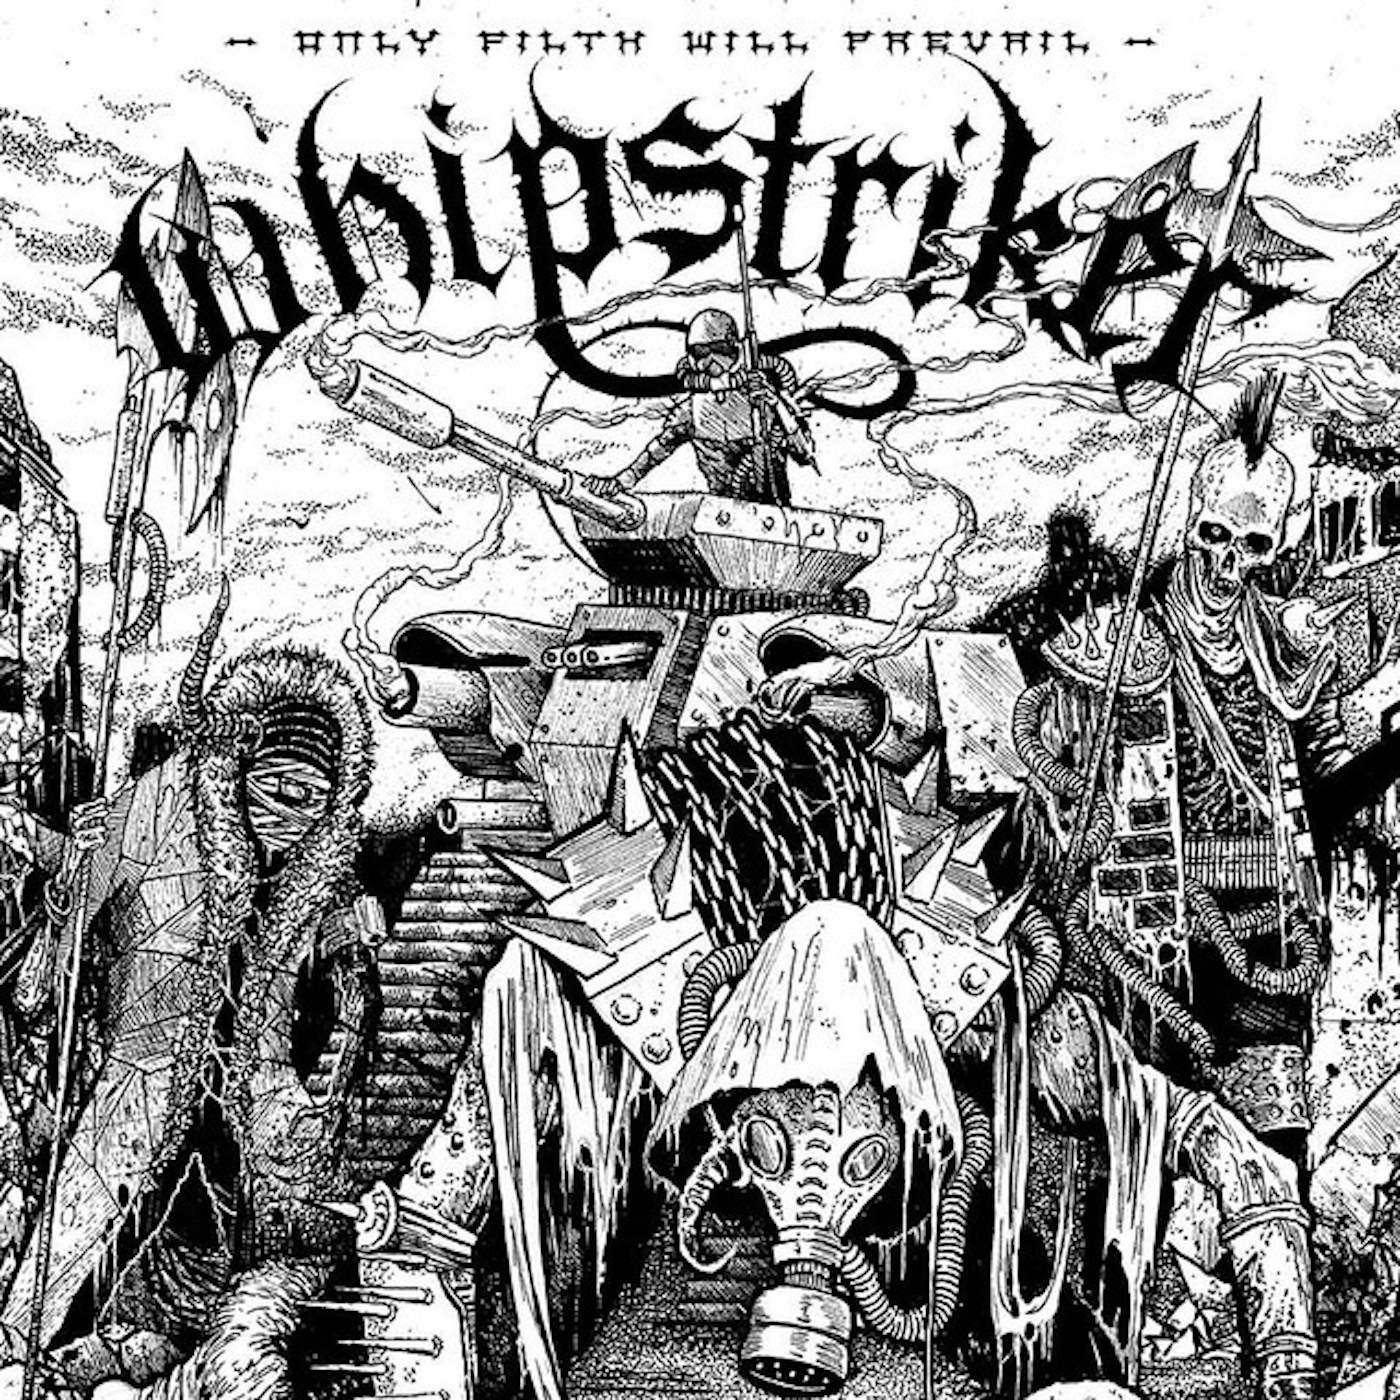 Whipstriker Only Filth Will Prevail Vinyl Record